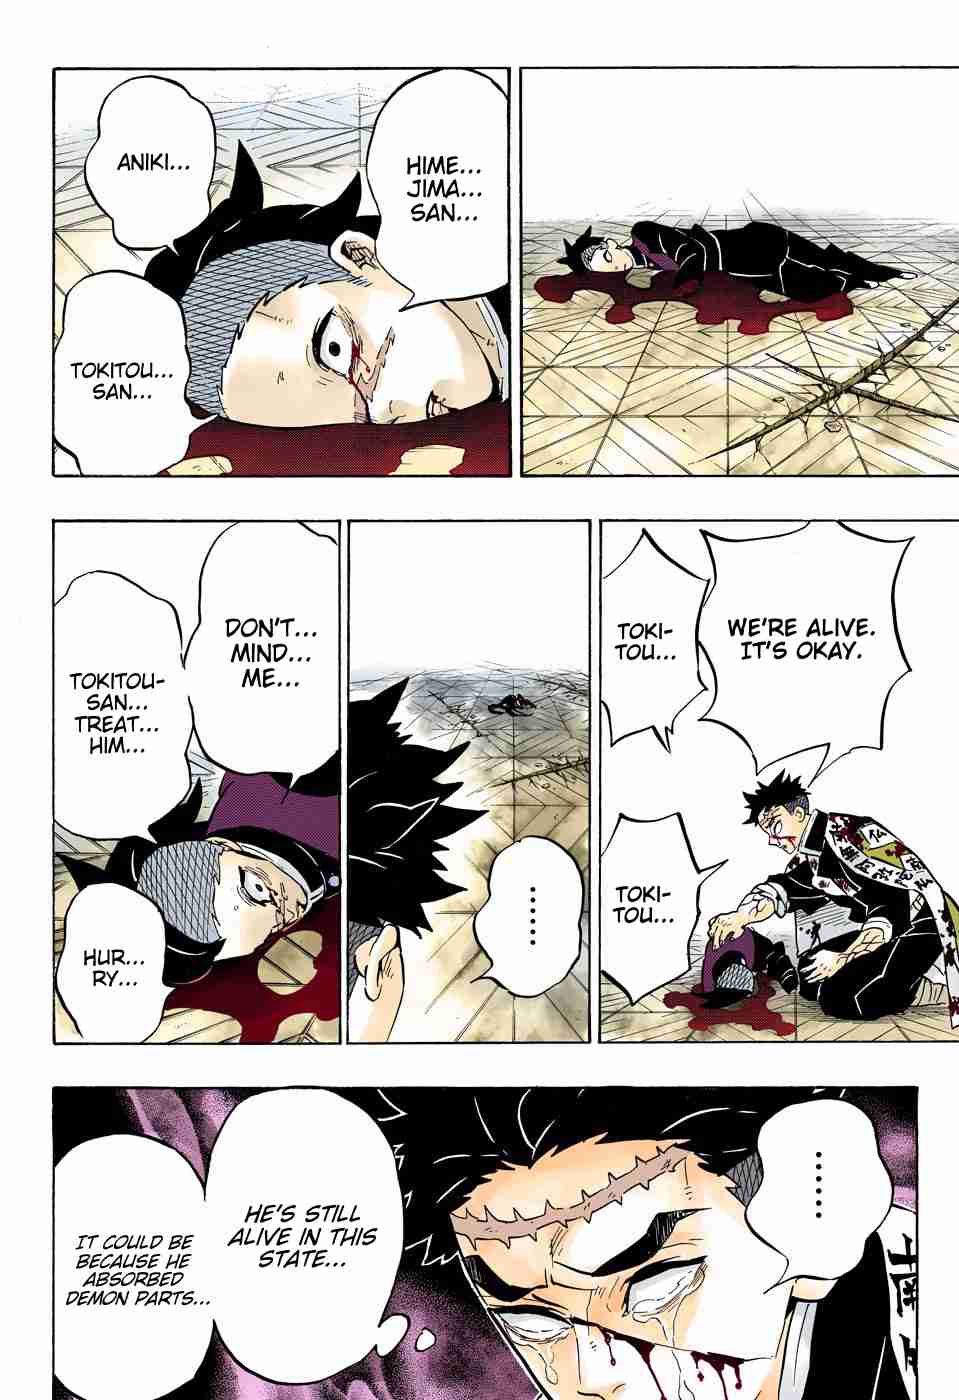 Kimetsu no Yaiba Digital Colored Comics Ch. 179 Love for the Older Brother, Love for the Younger Brother